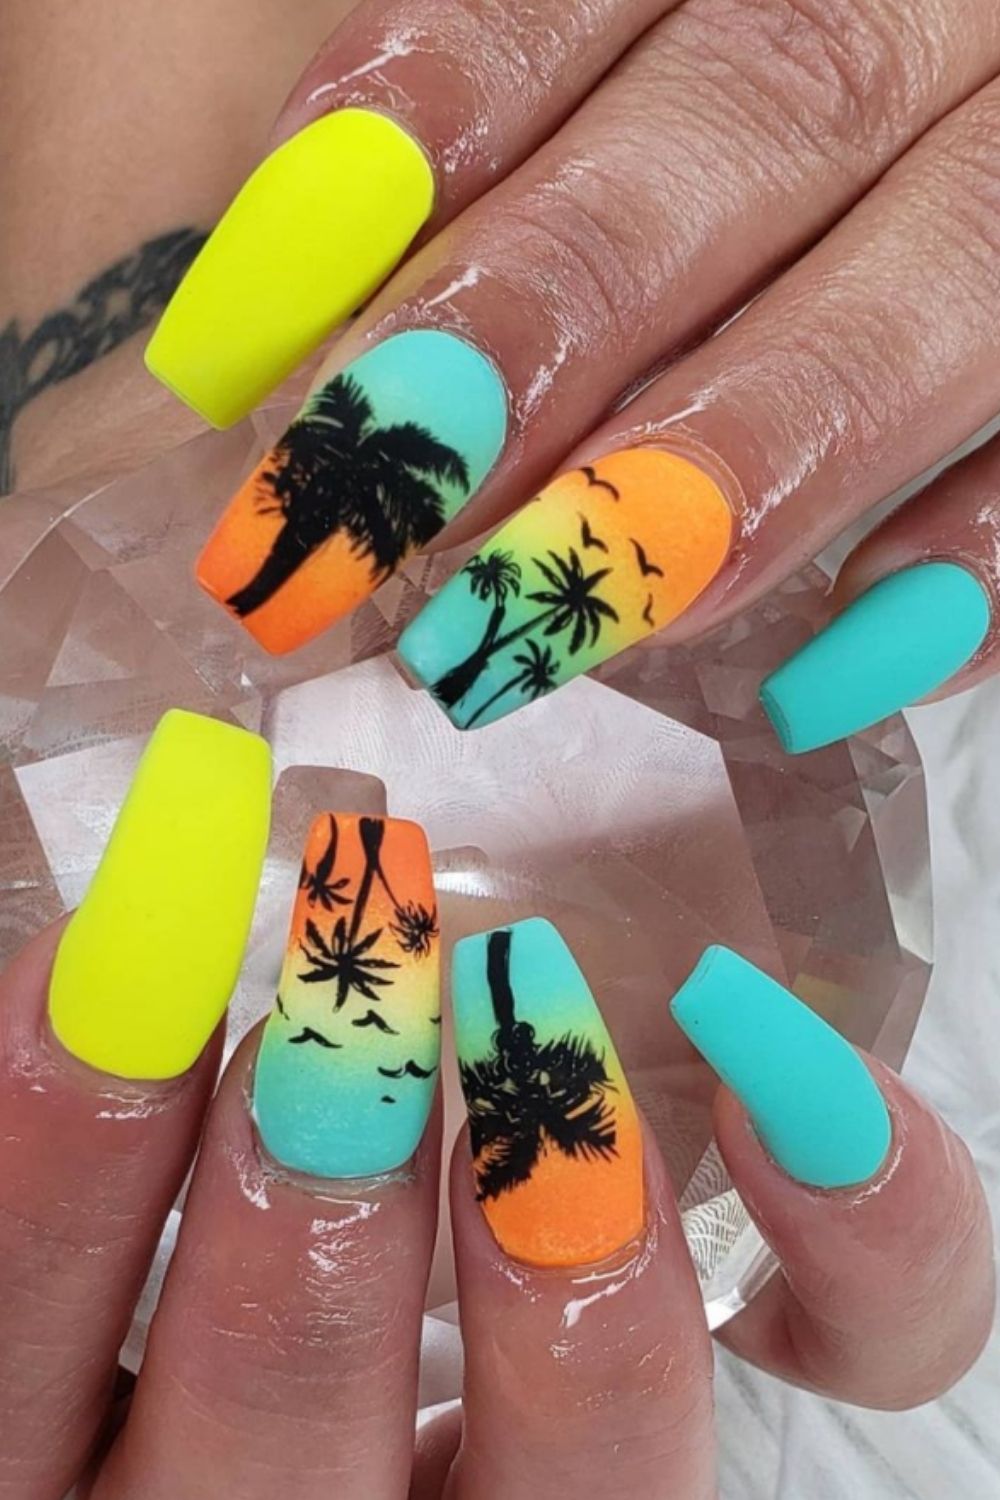 We all love this tropical style nail design